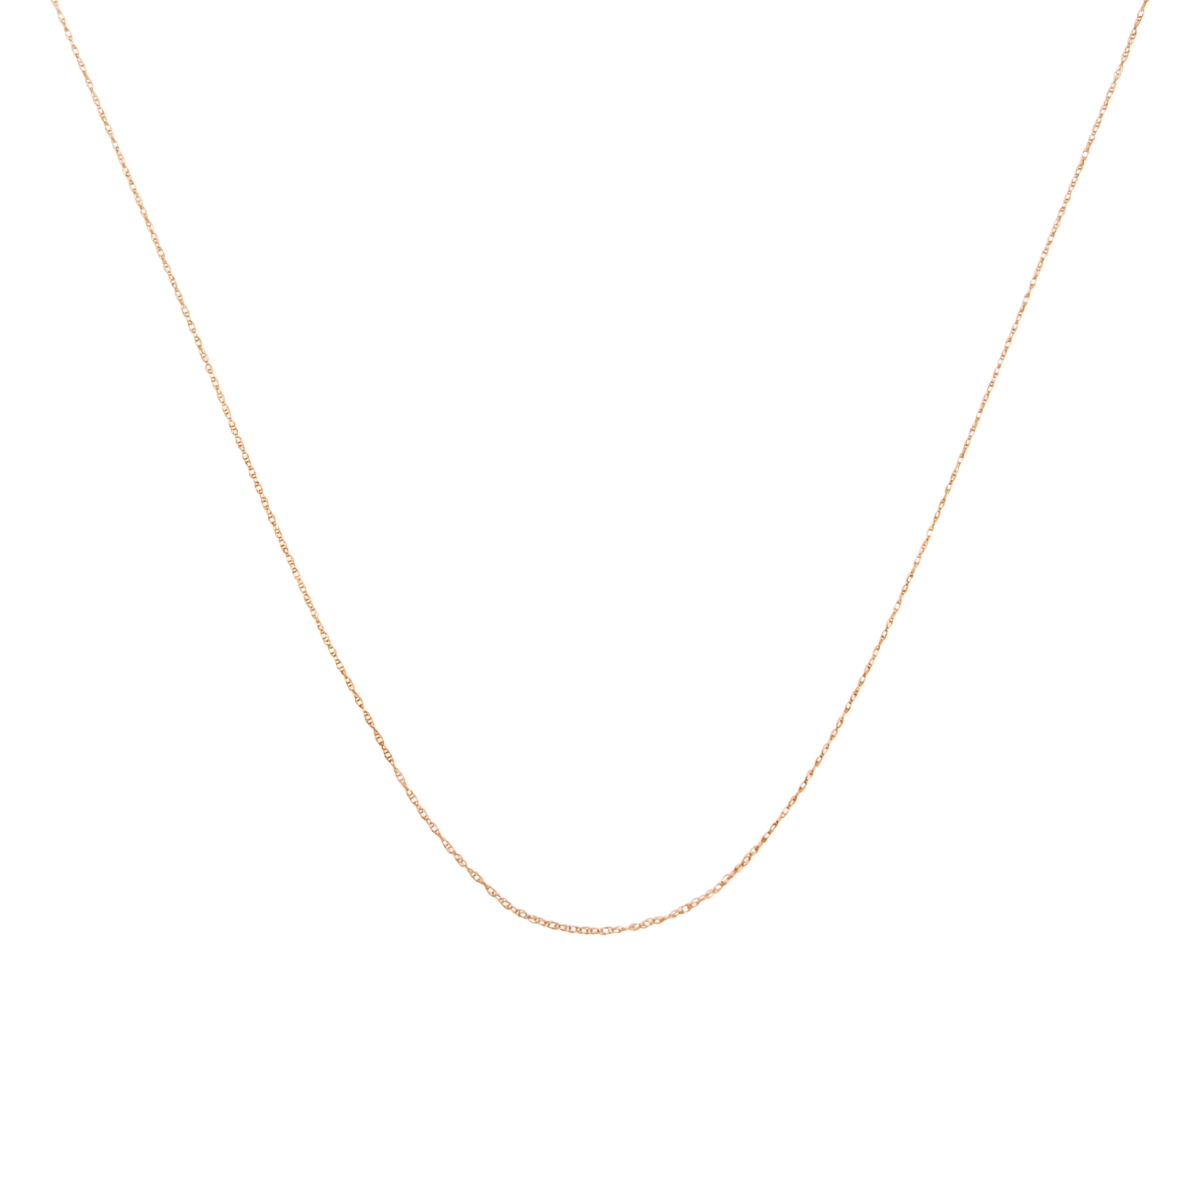 Picture of Infinite Jewels 018049C5RC Solid 10K Rose Gold 0.5 mm Rope Chain Necklace for Unisex Chain - Size 20 in.